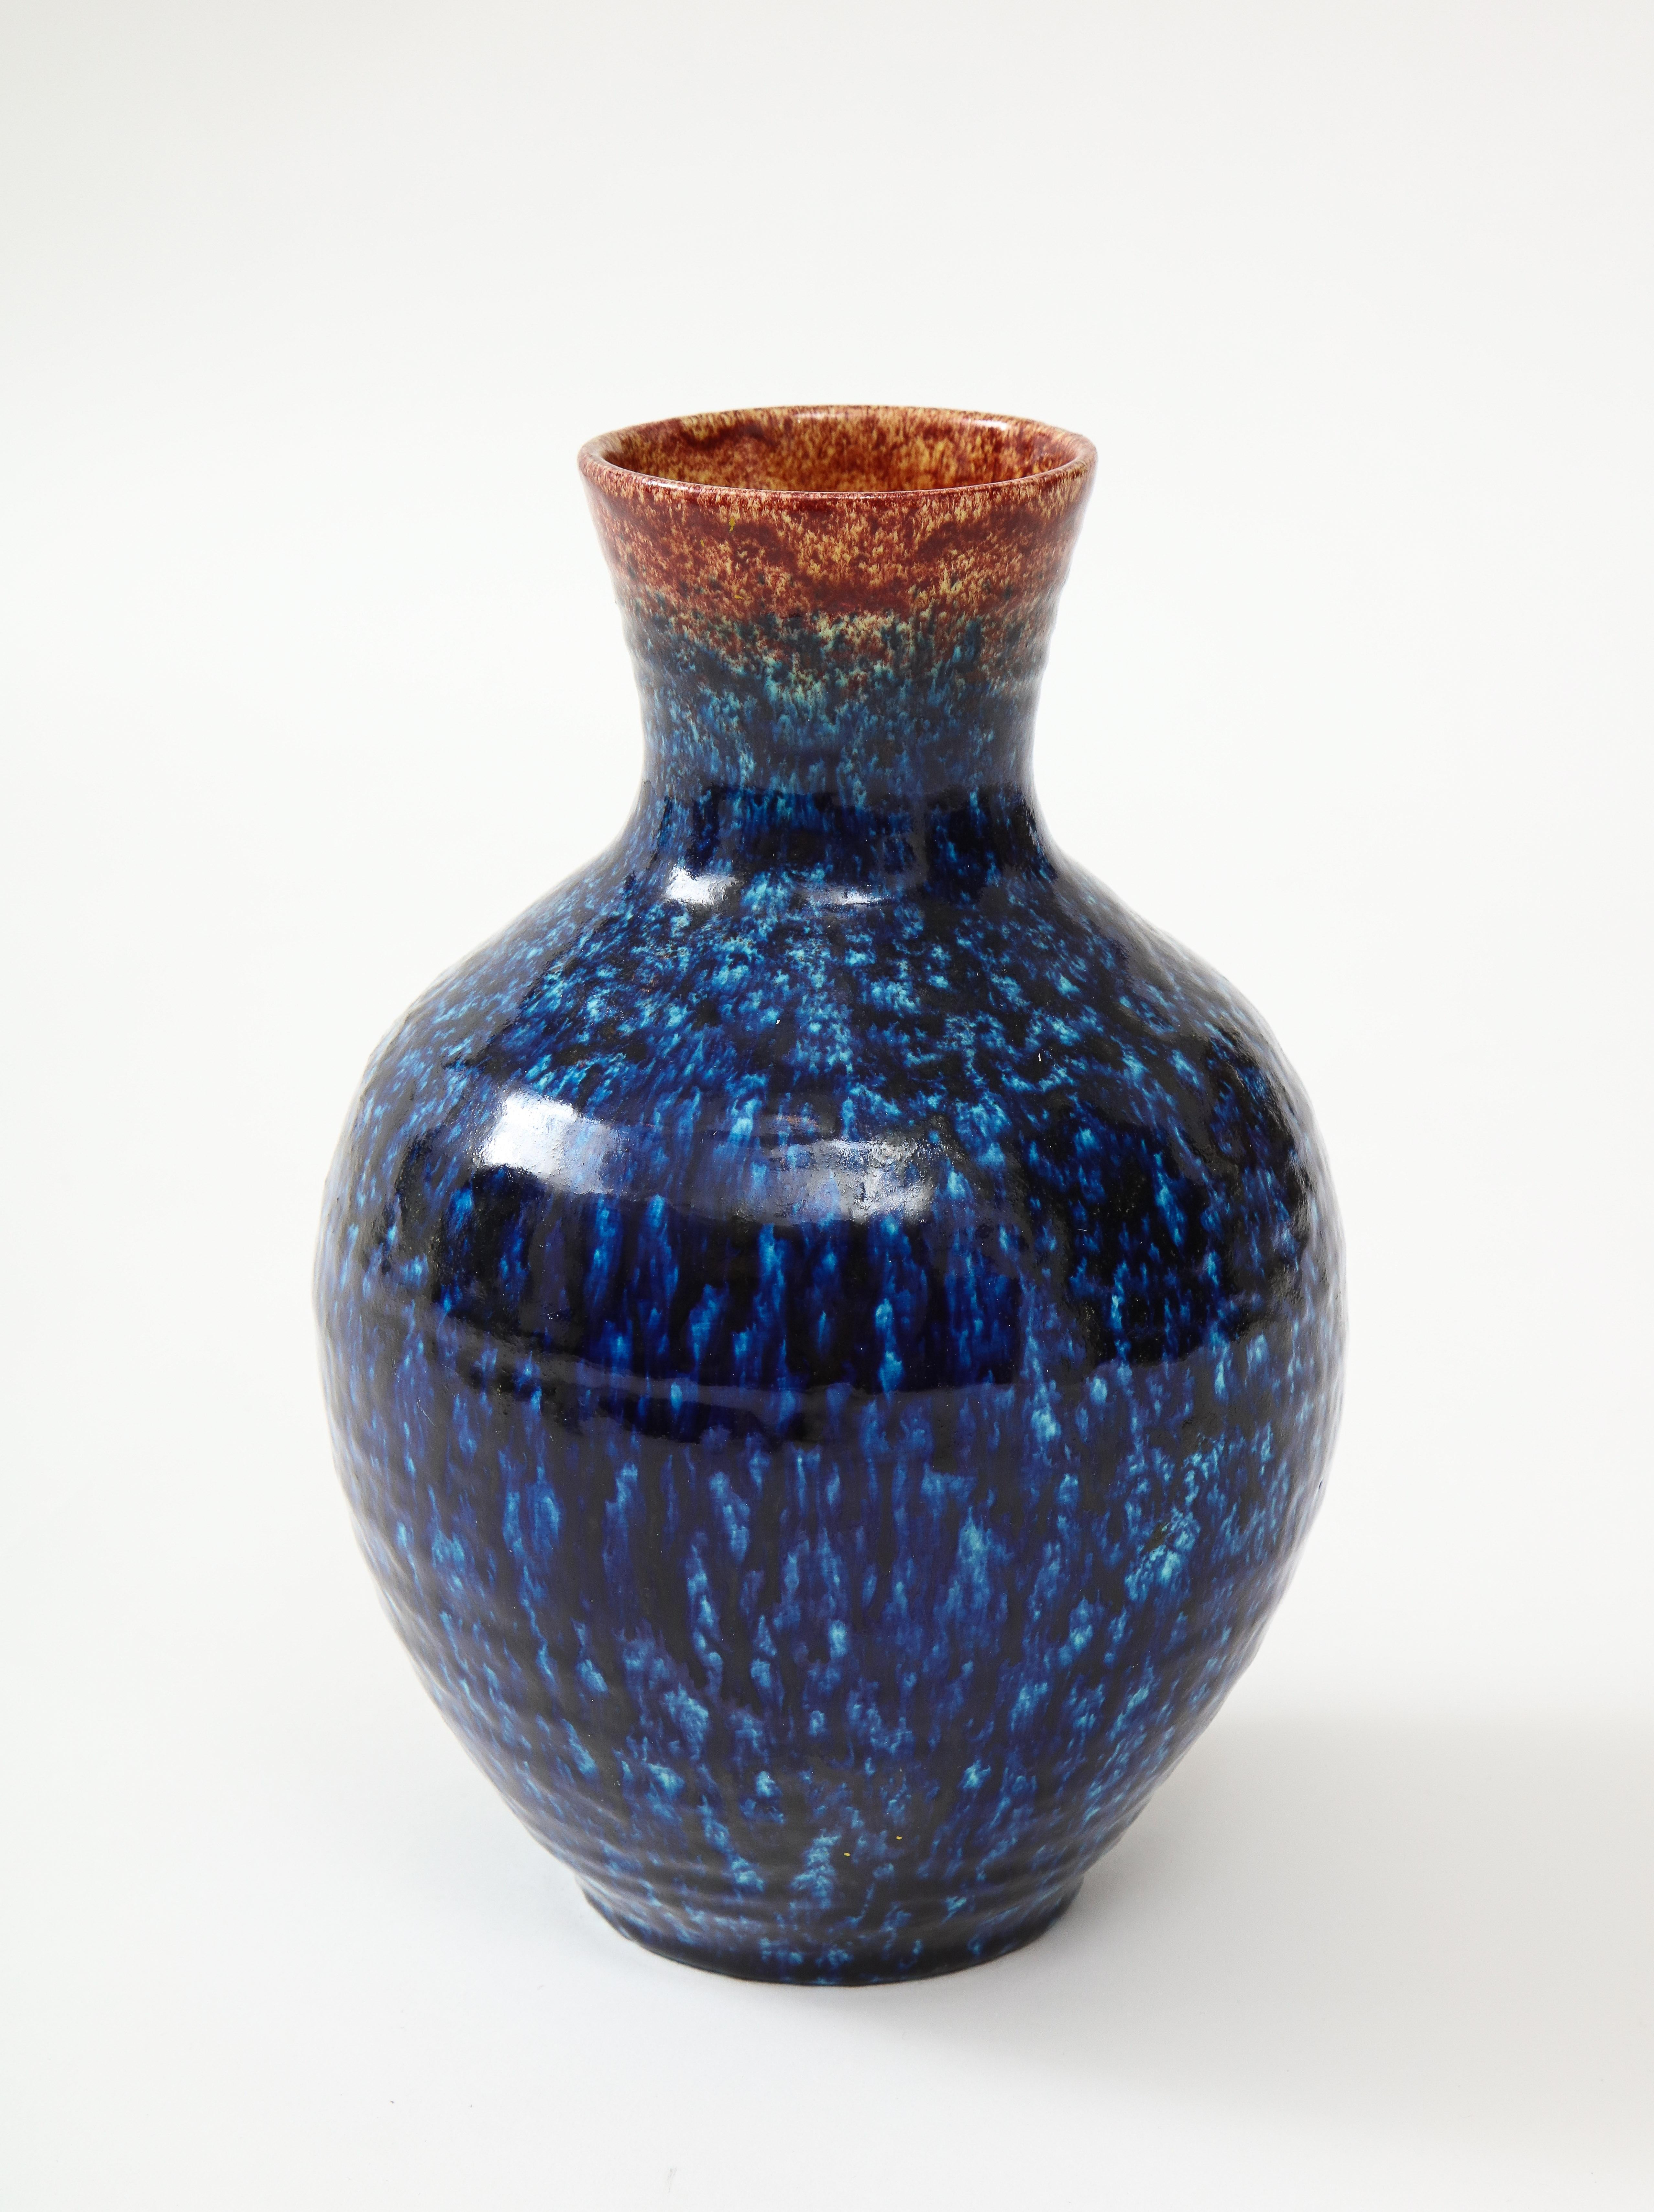 A stunning vase made by Accolay Pottery, France, ca. 1950.